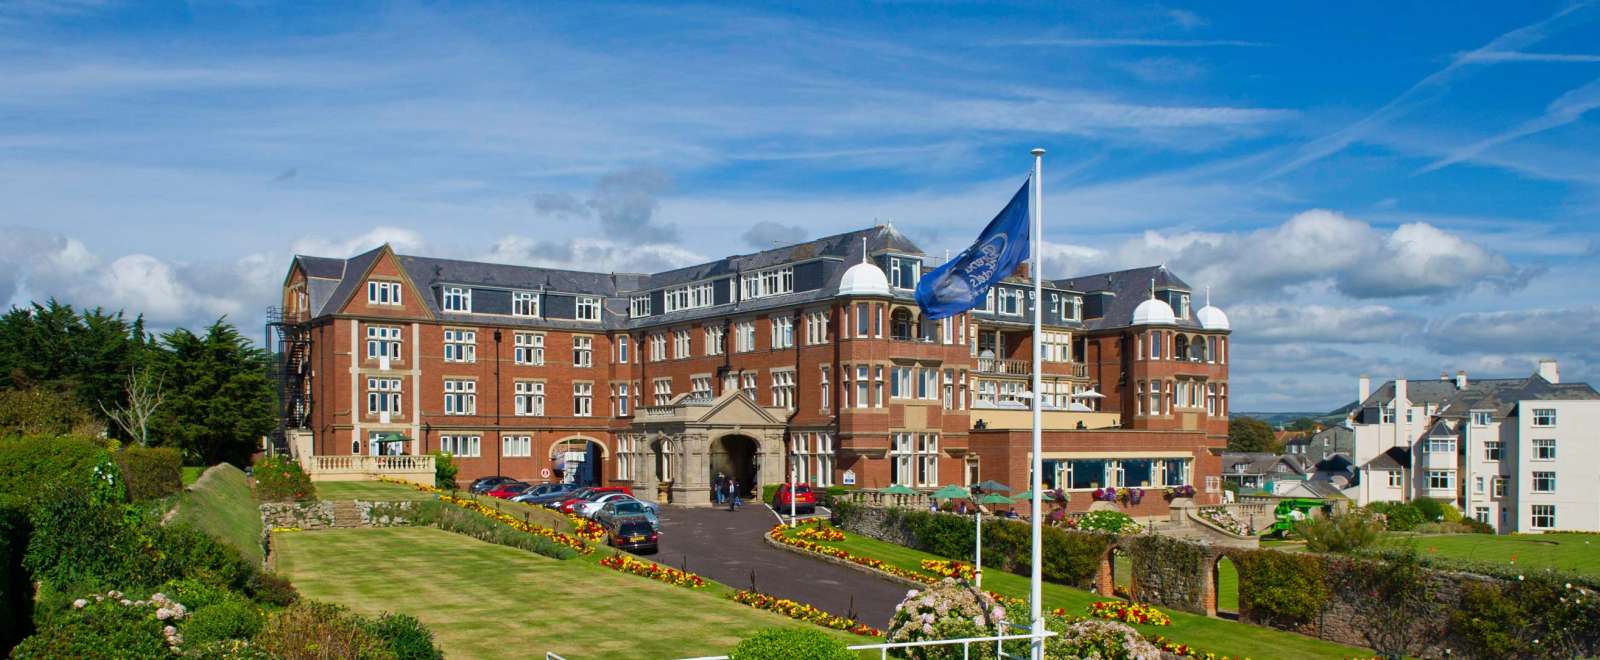 Victoria Hotel External View with Flag and Gardens